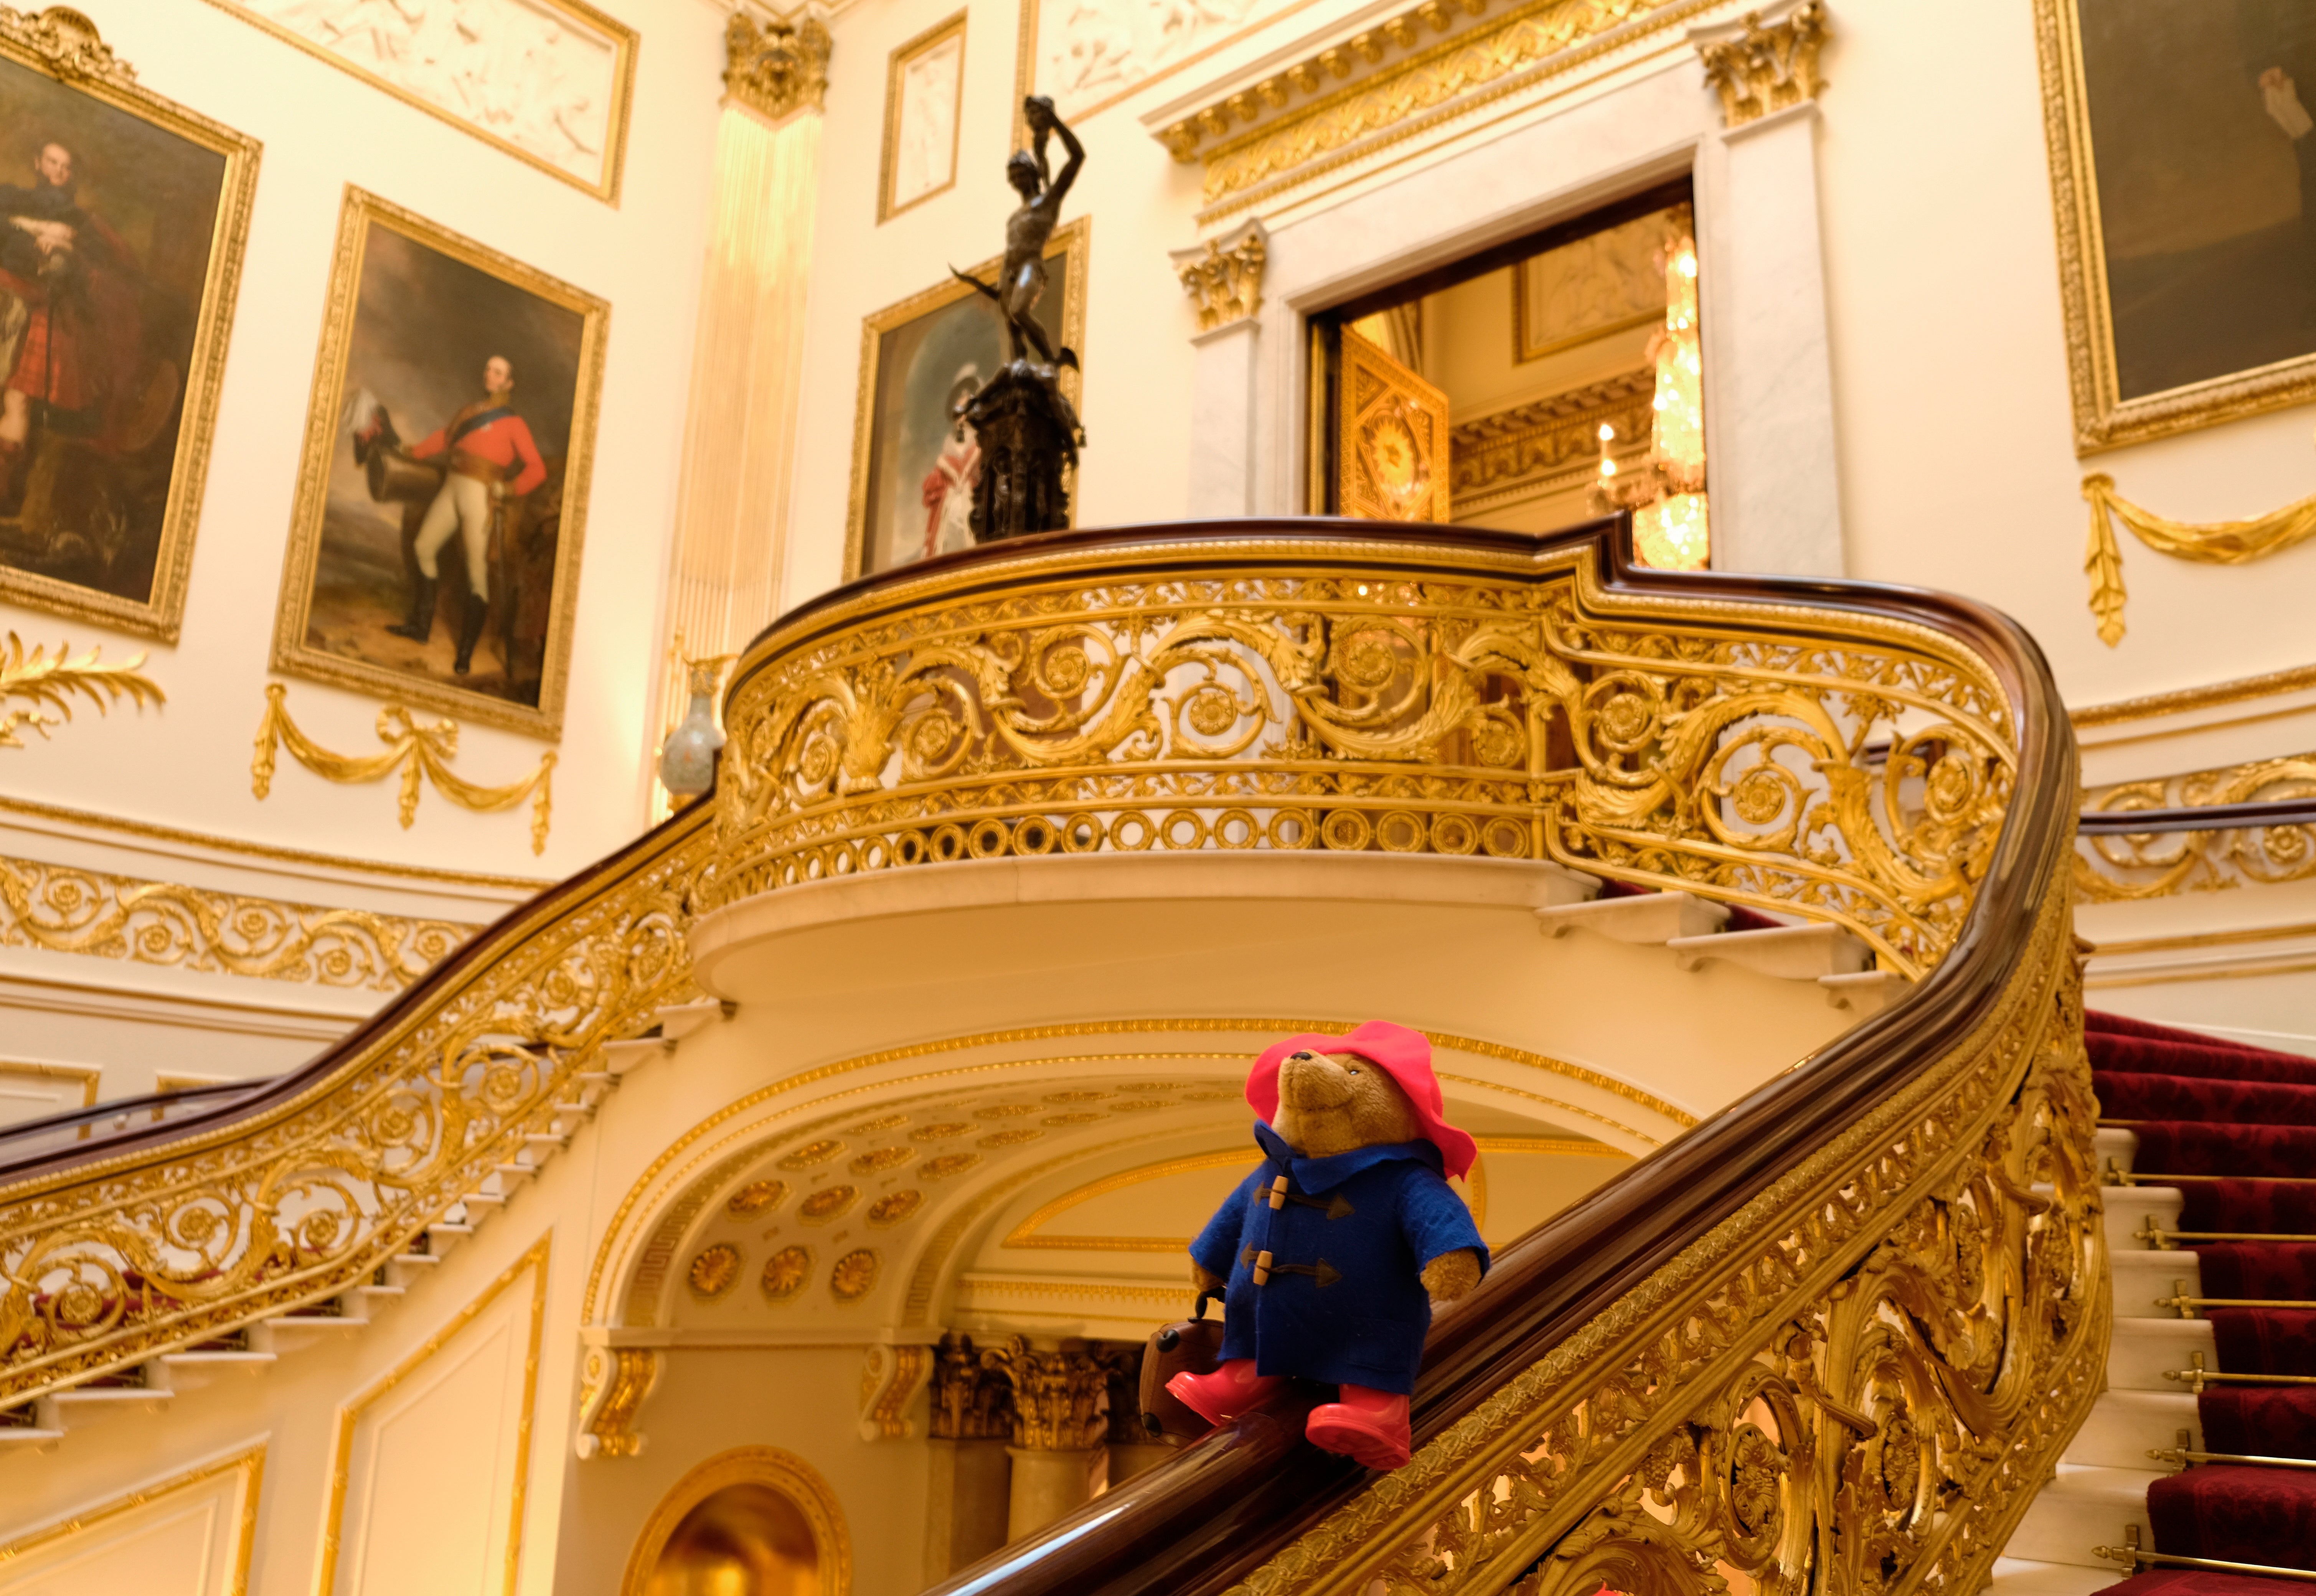 A Paddington bear on the Grand Staircase at Buckingham Palace in London